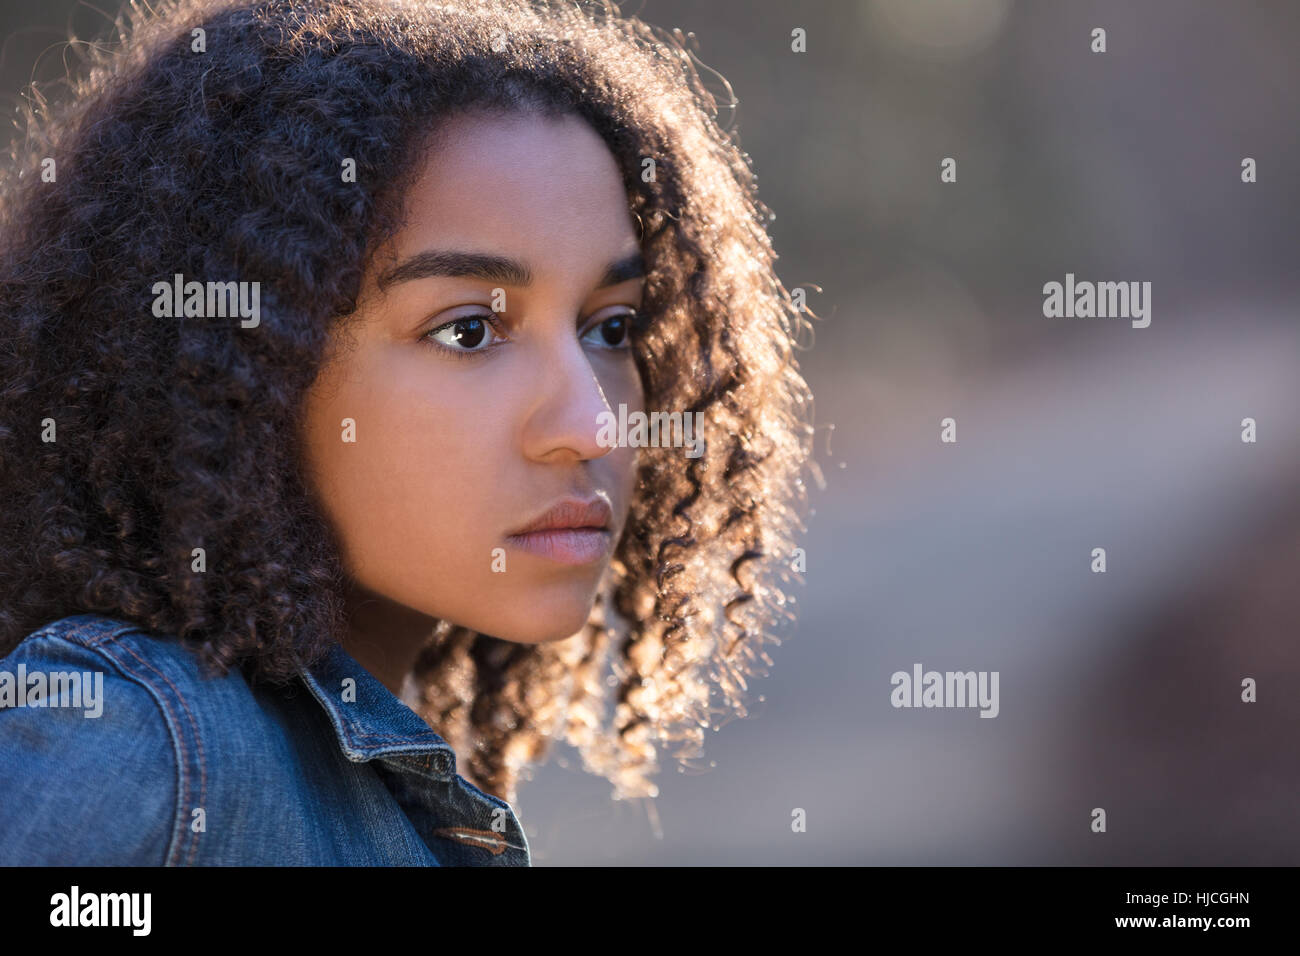 Beautiful mixed race African American girl teenager female young woman outside by a road looking sad depressed or thoughtful Stock Photo